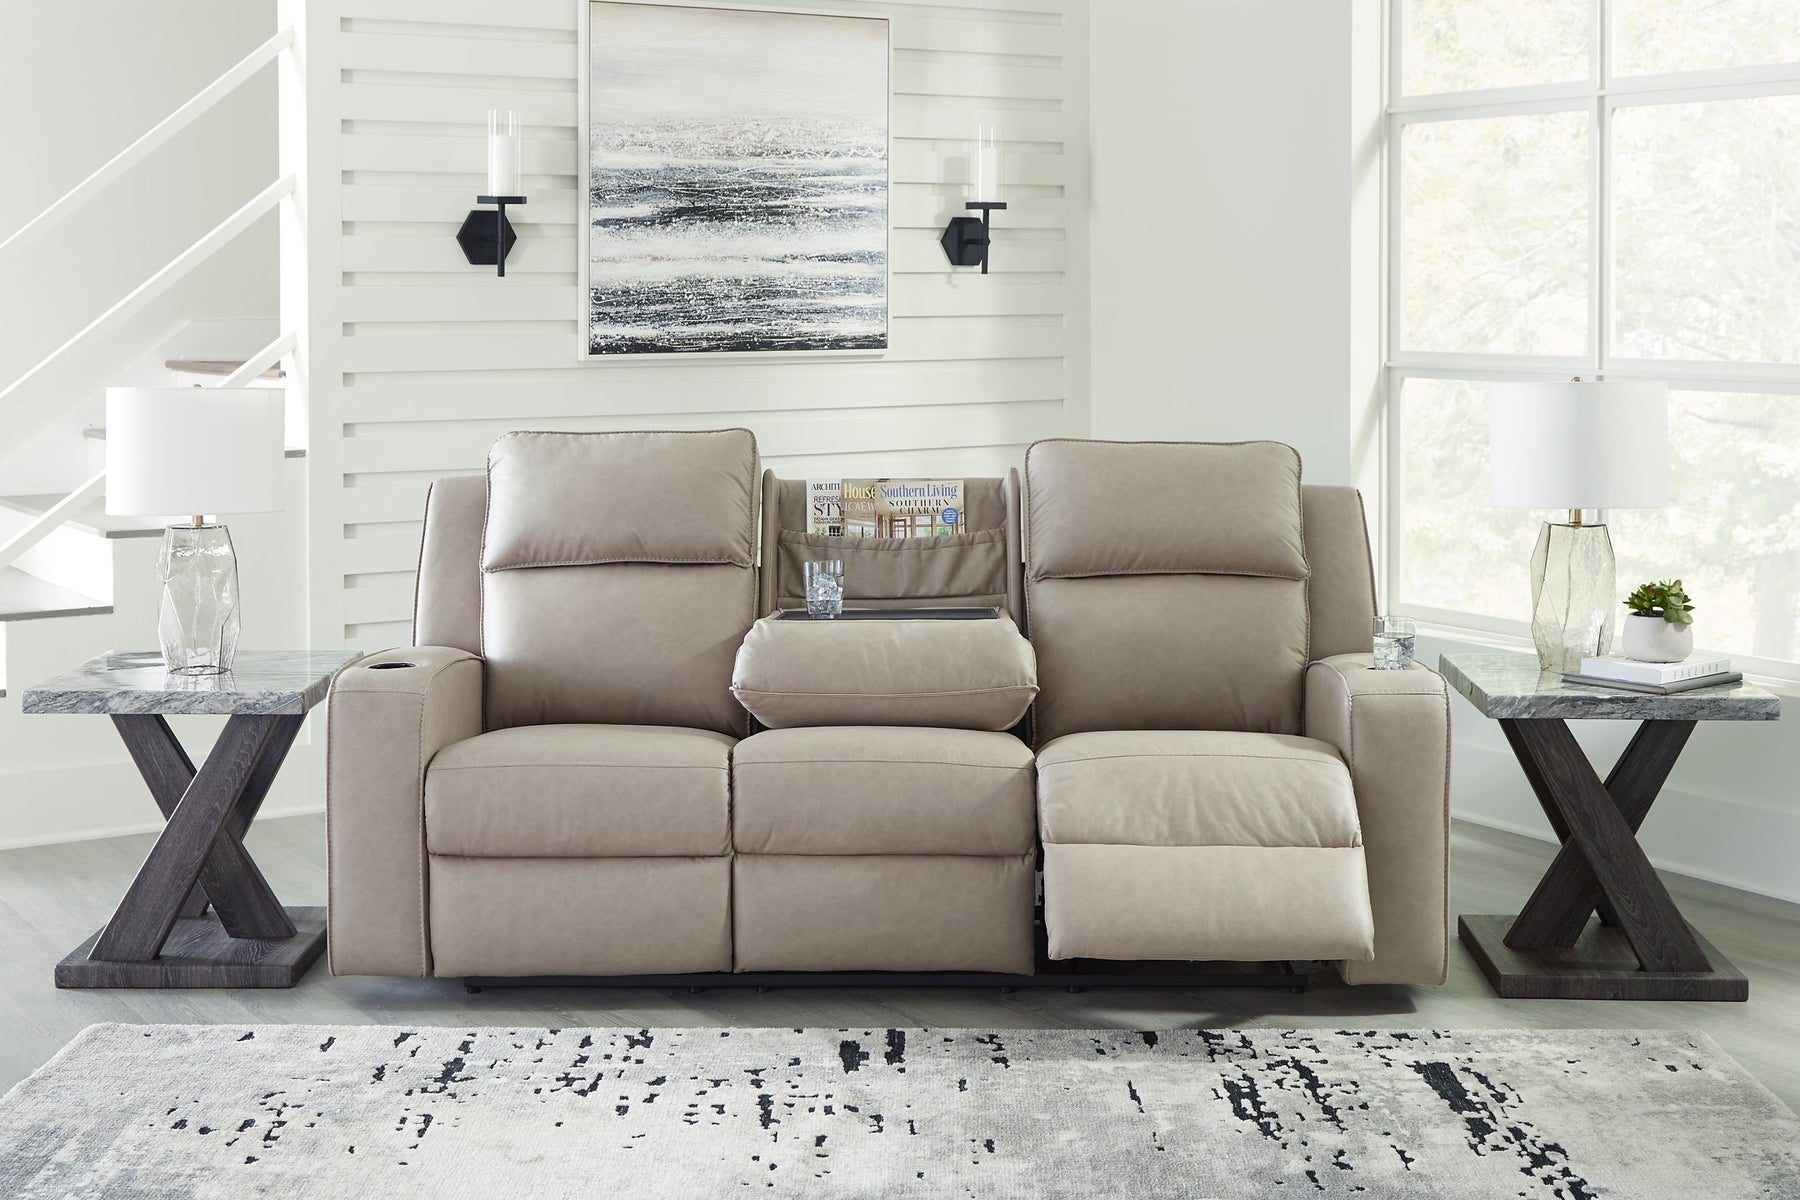 Lavenhorne Reclining Sofa with Drop Down Table - Half Price Furniture